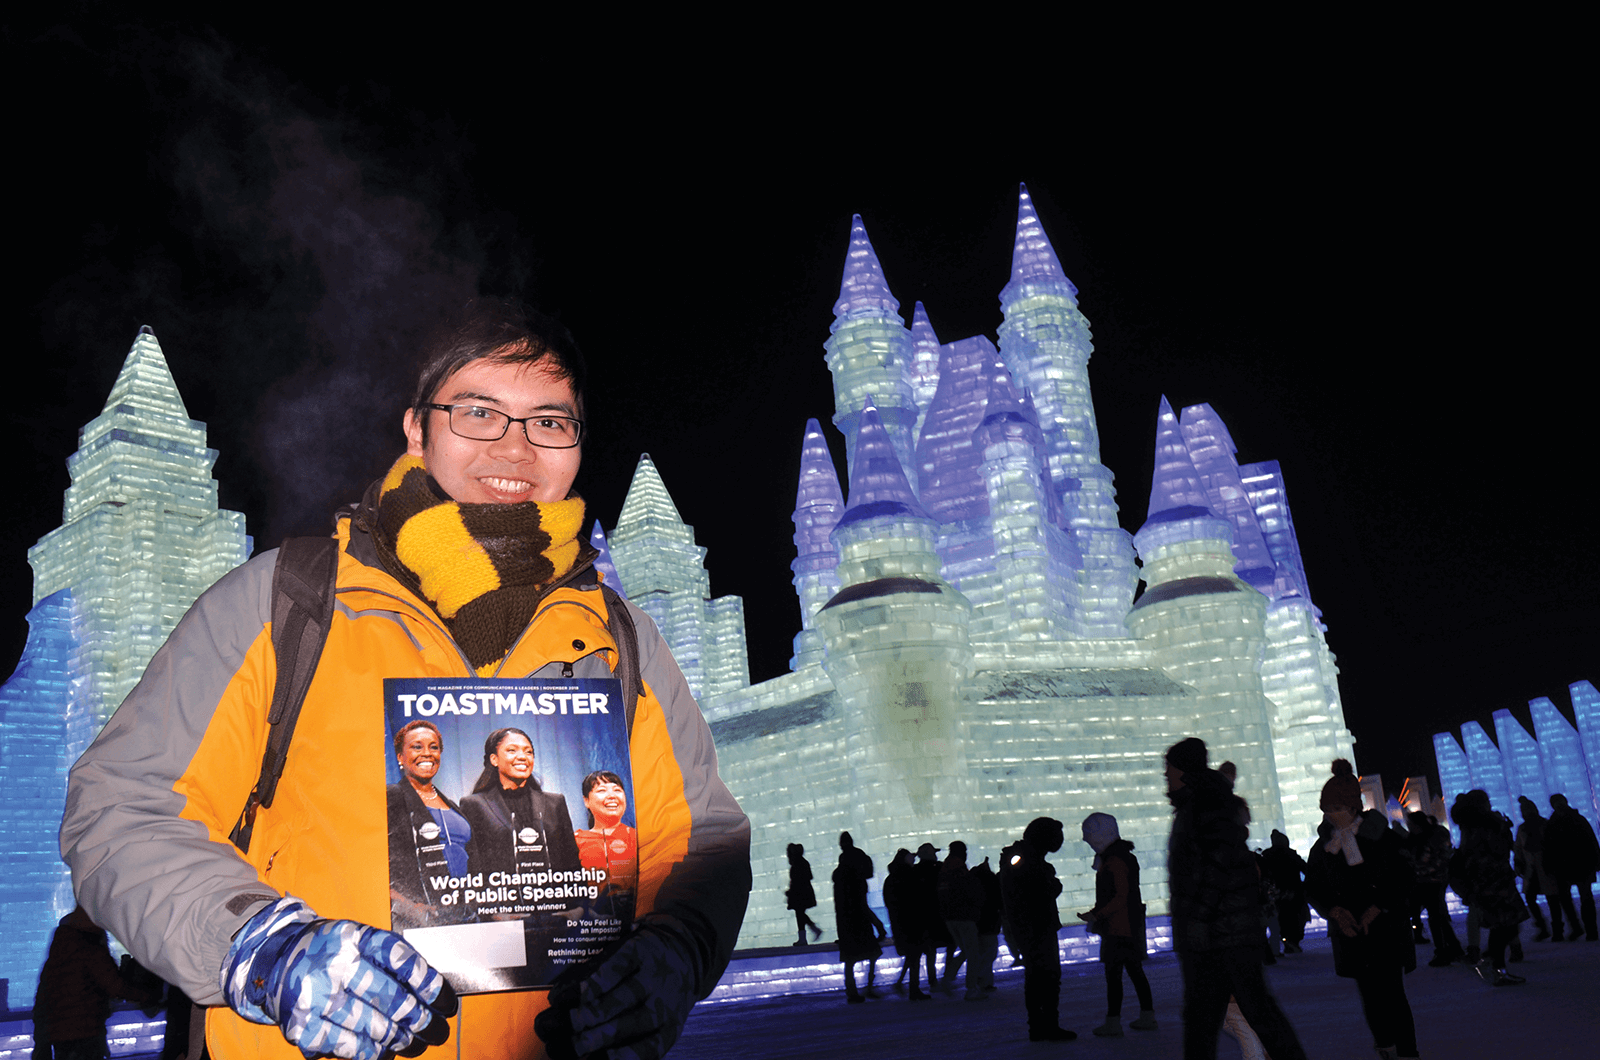 Lam Ngai Fung of Tai Po, Hong Kong, celebrates his birthday with a visit to the International Ice and Snow Sculpture Festival in Harbin, Heilongjiang, China.